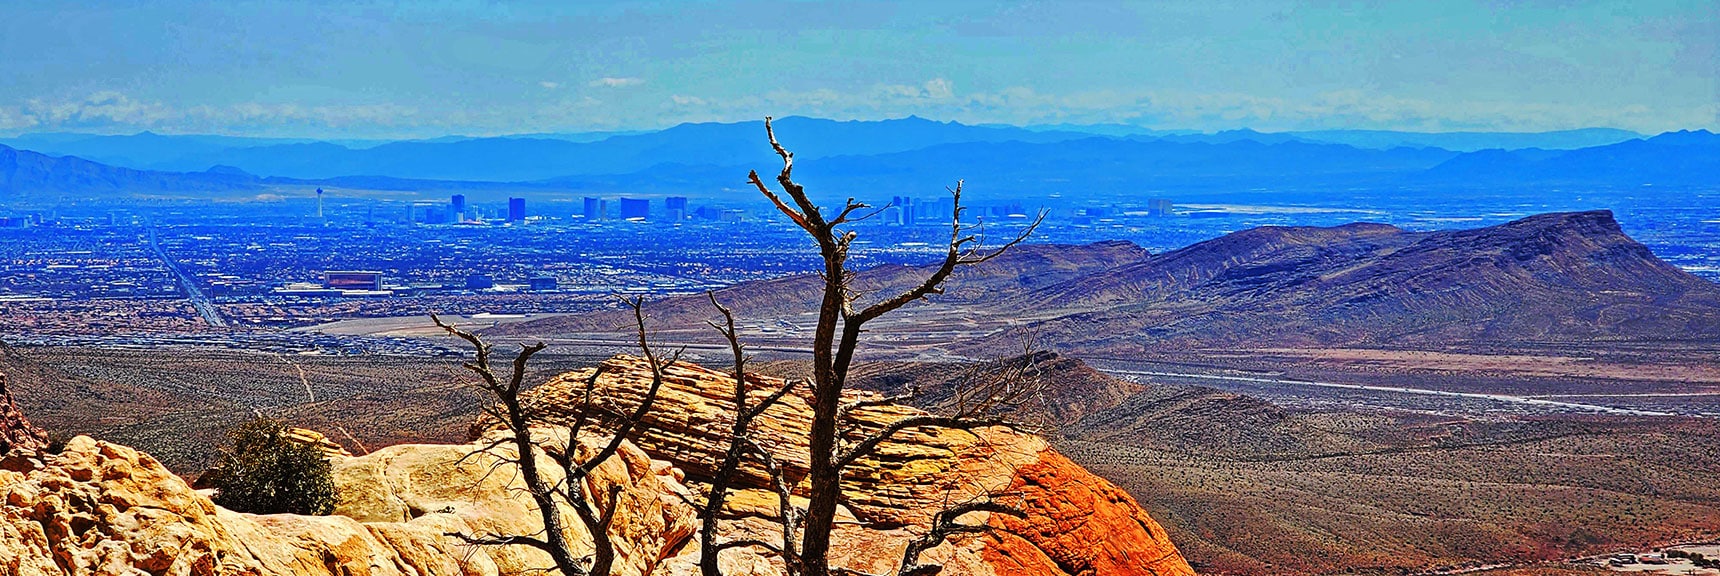 Las Vegas Valley and Strip from Calico Tanks Upper Viewpoint. Blue Diamond Hill Foreground | Ash Canyon to Calico Tanks | Calico Basin and Red Rock Canyon, Nevada | David Smith | Las Vegas Area Trails